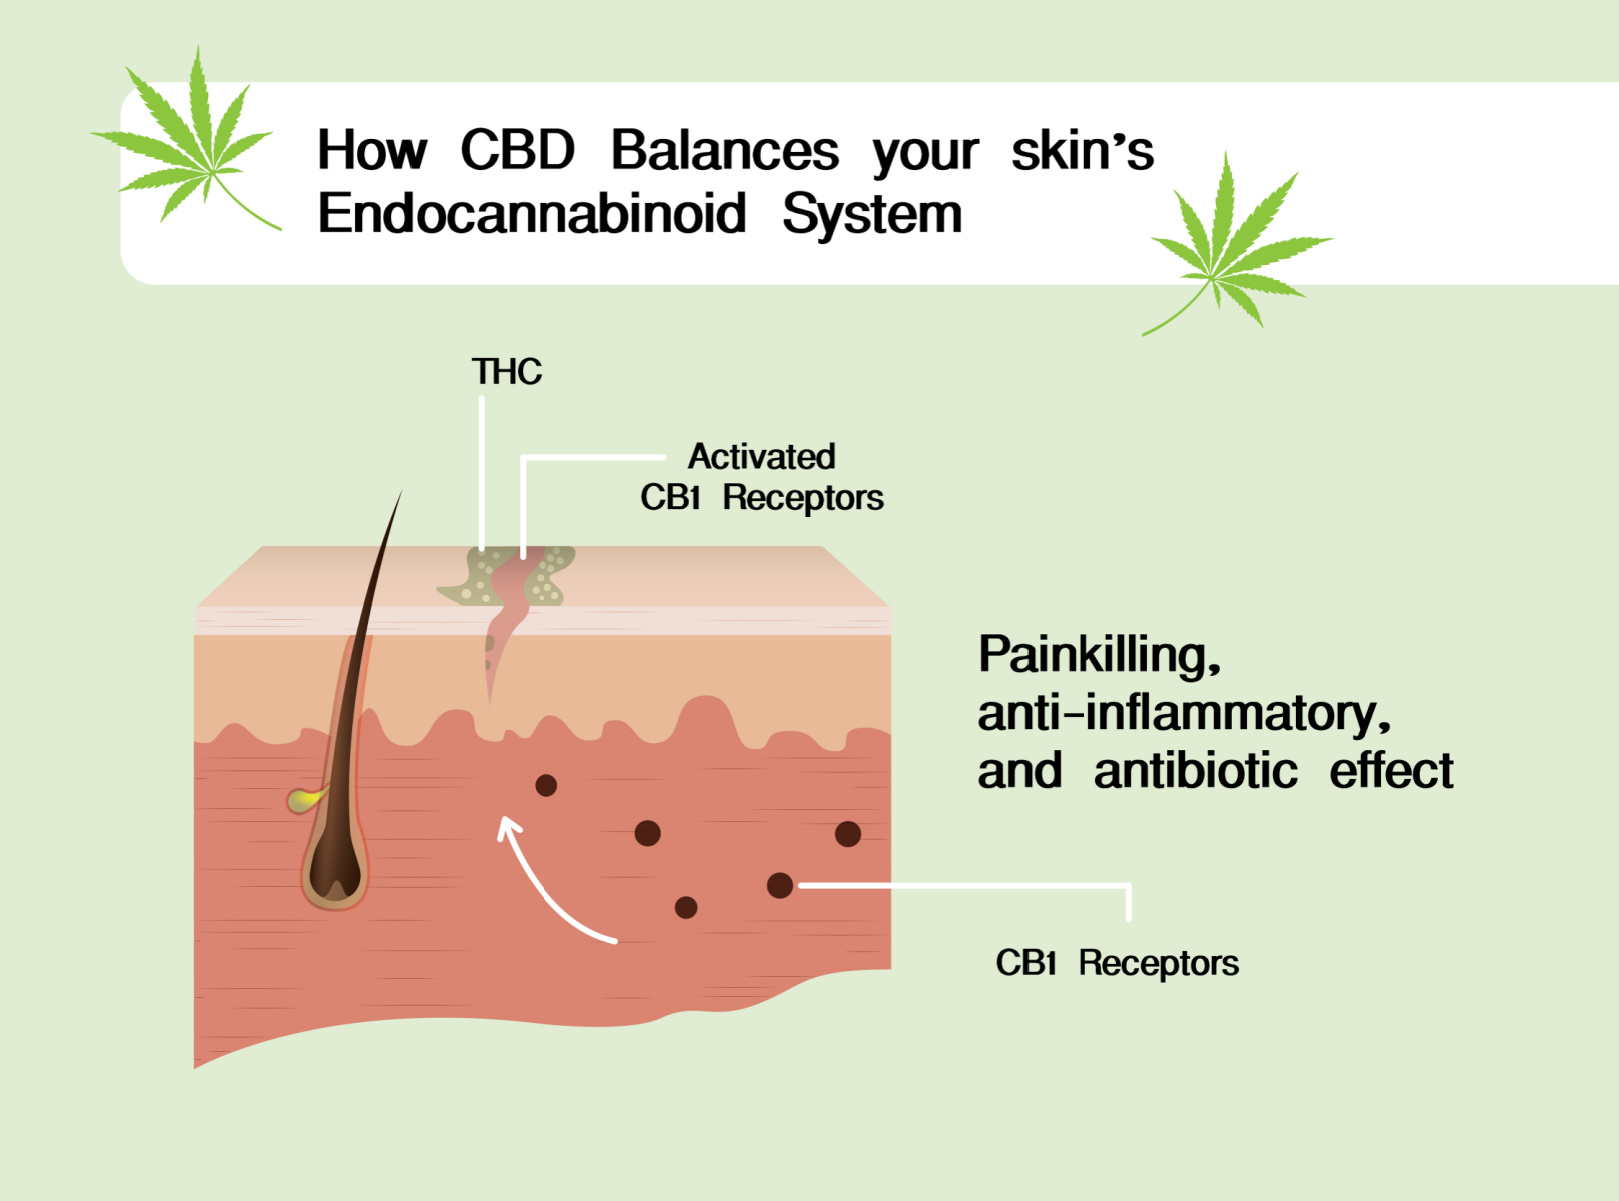 The relationship between CBD use and acne prevention and clearing. CBD may help to reduce the severity of acne and improve the overall appearance of the skin.